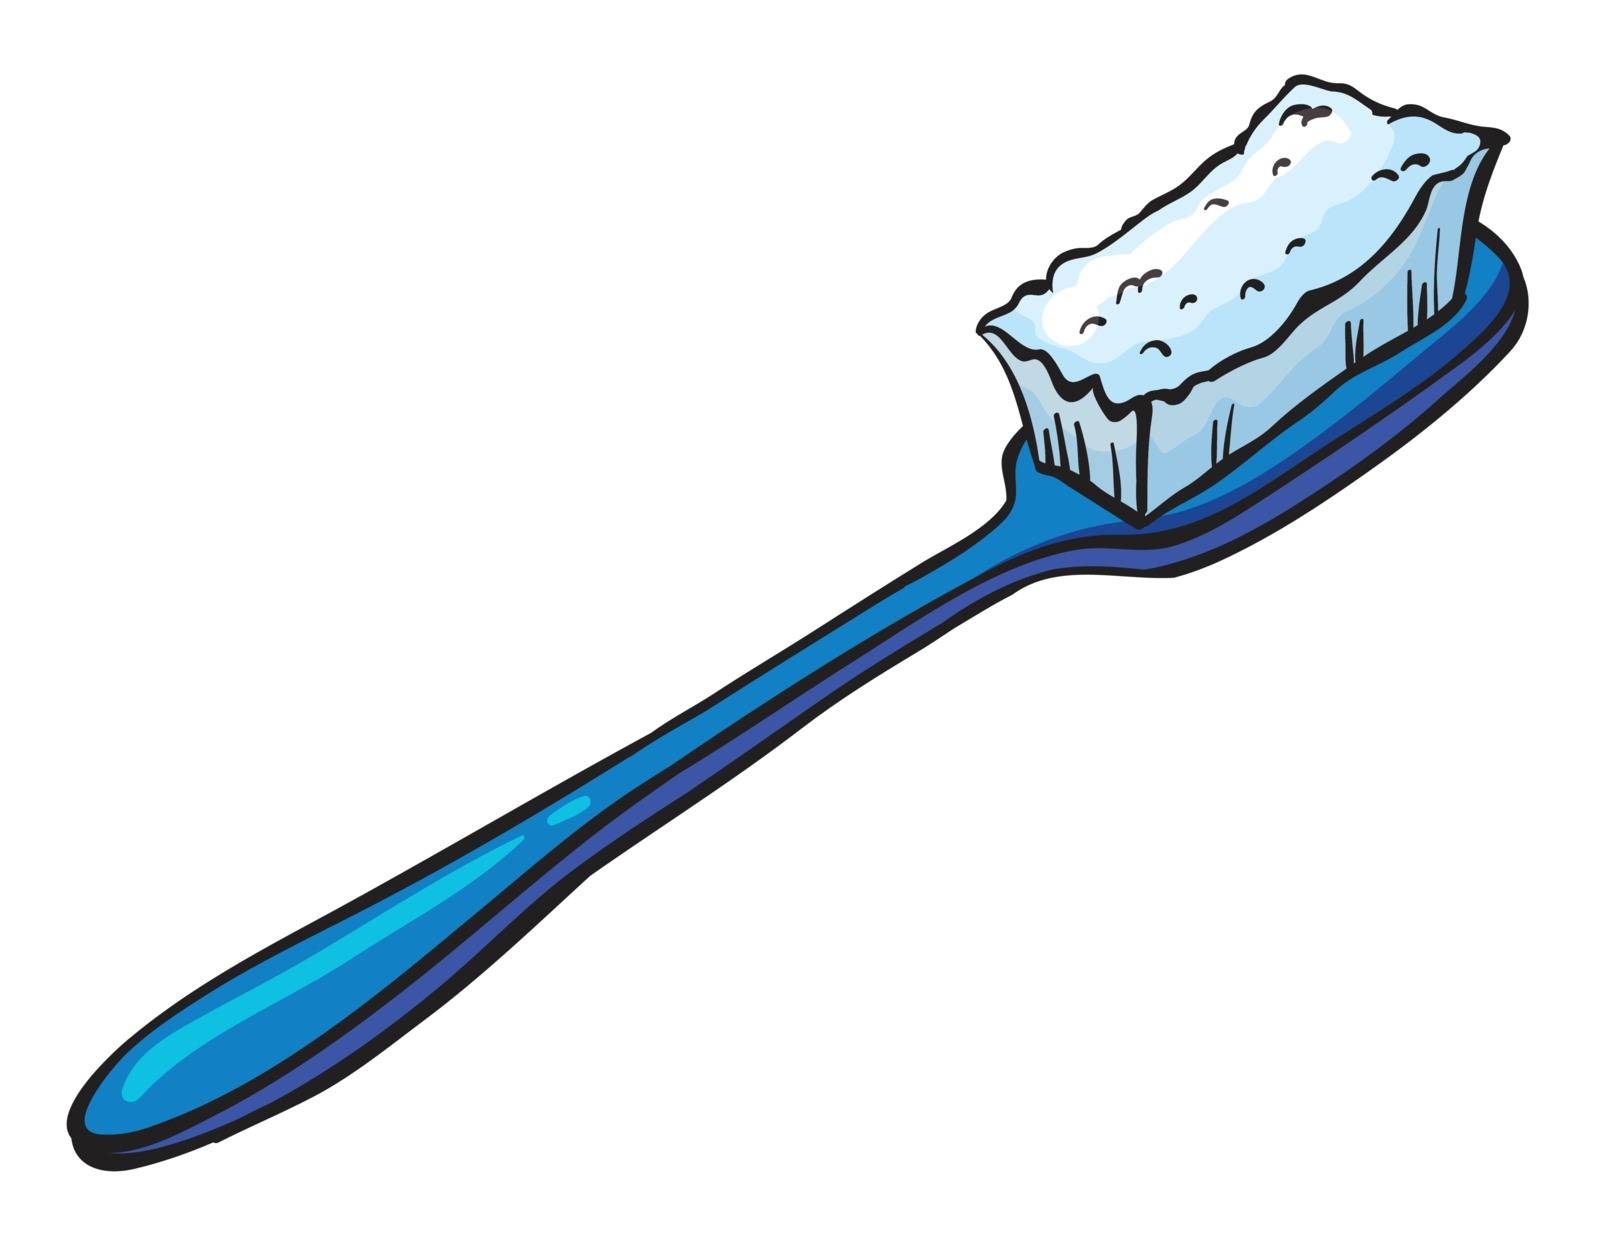 Illustration of a blue toothbrush on a white background